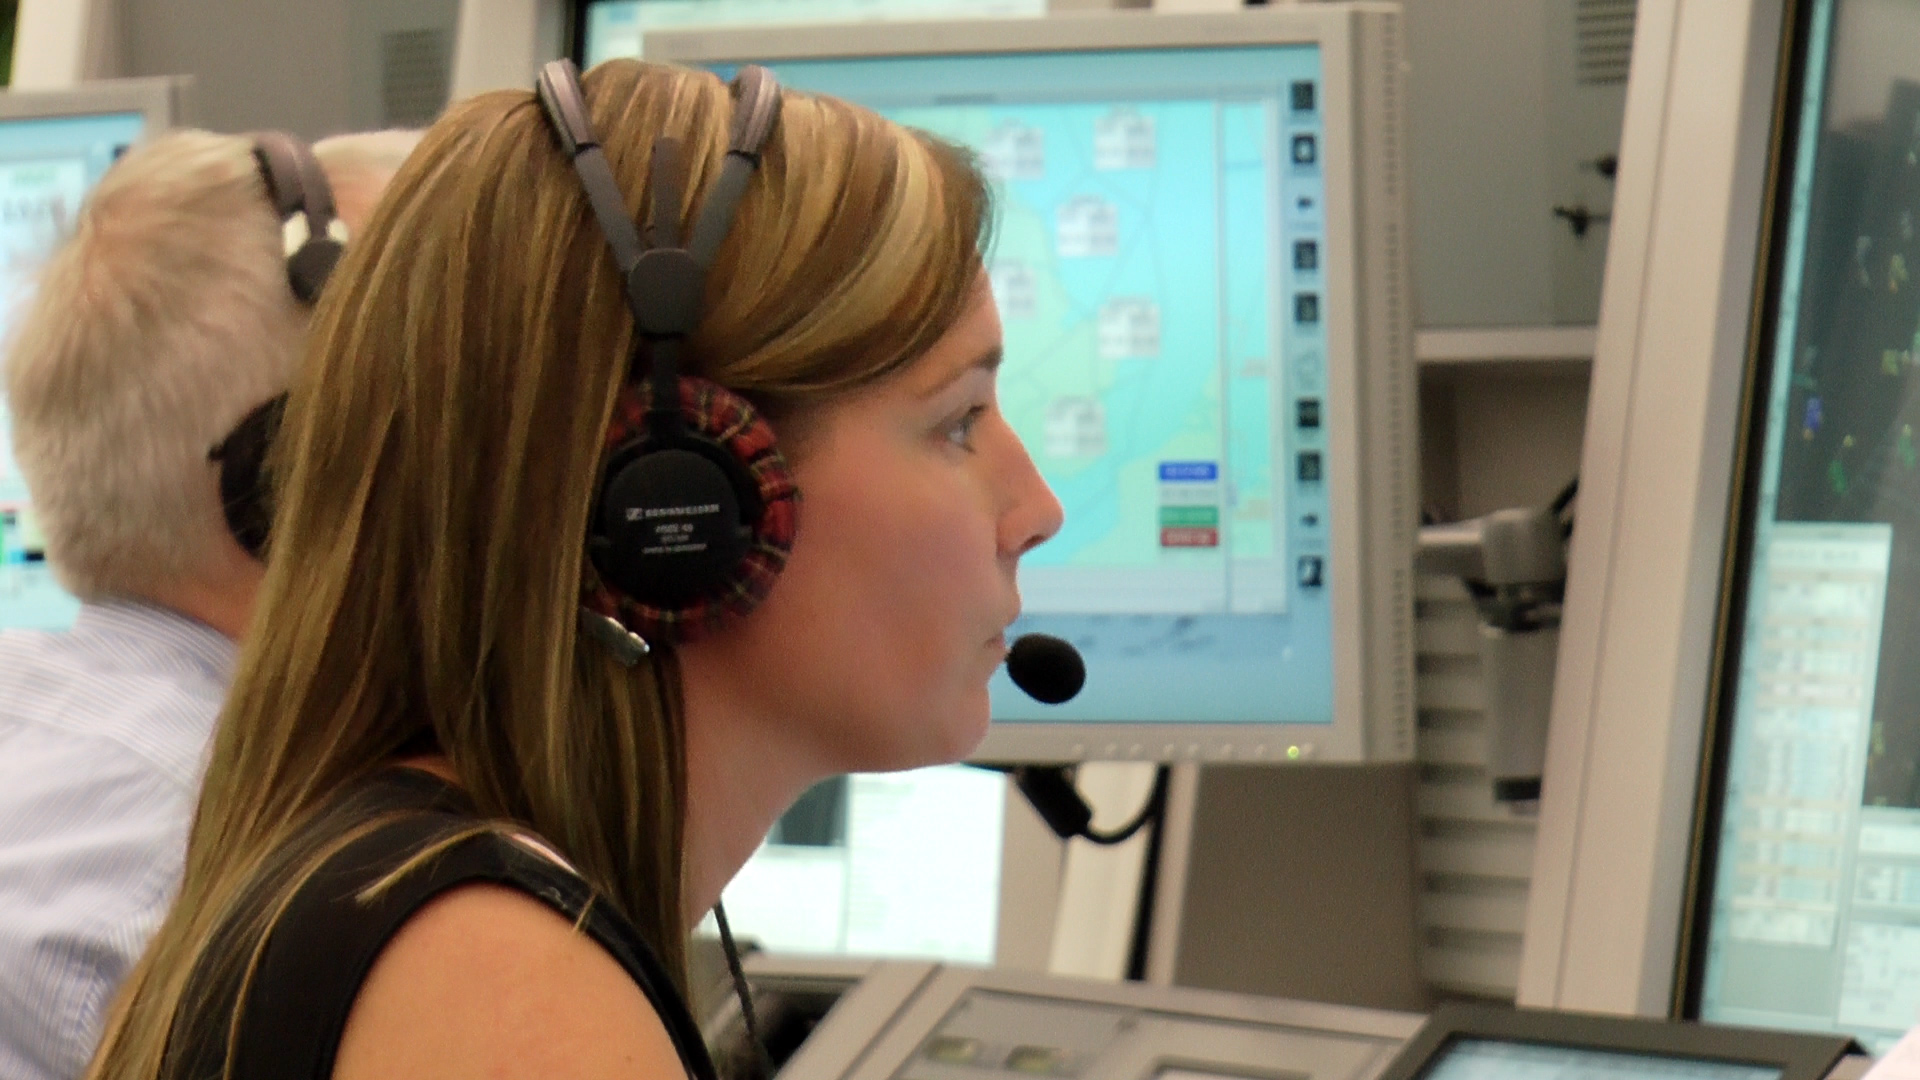 Kathryn Parker, NATS air traffic controller, managing the flight from the control centre in Swanwick.